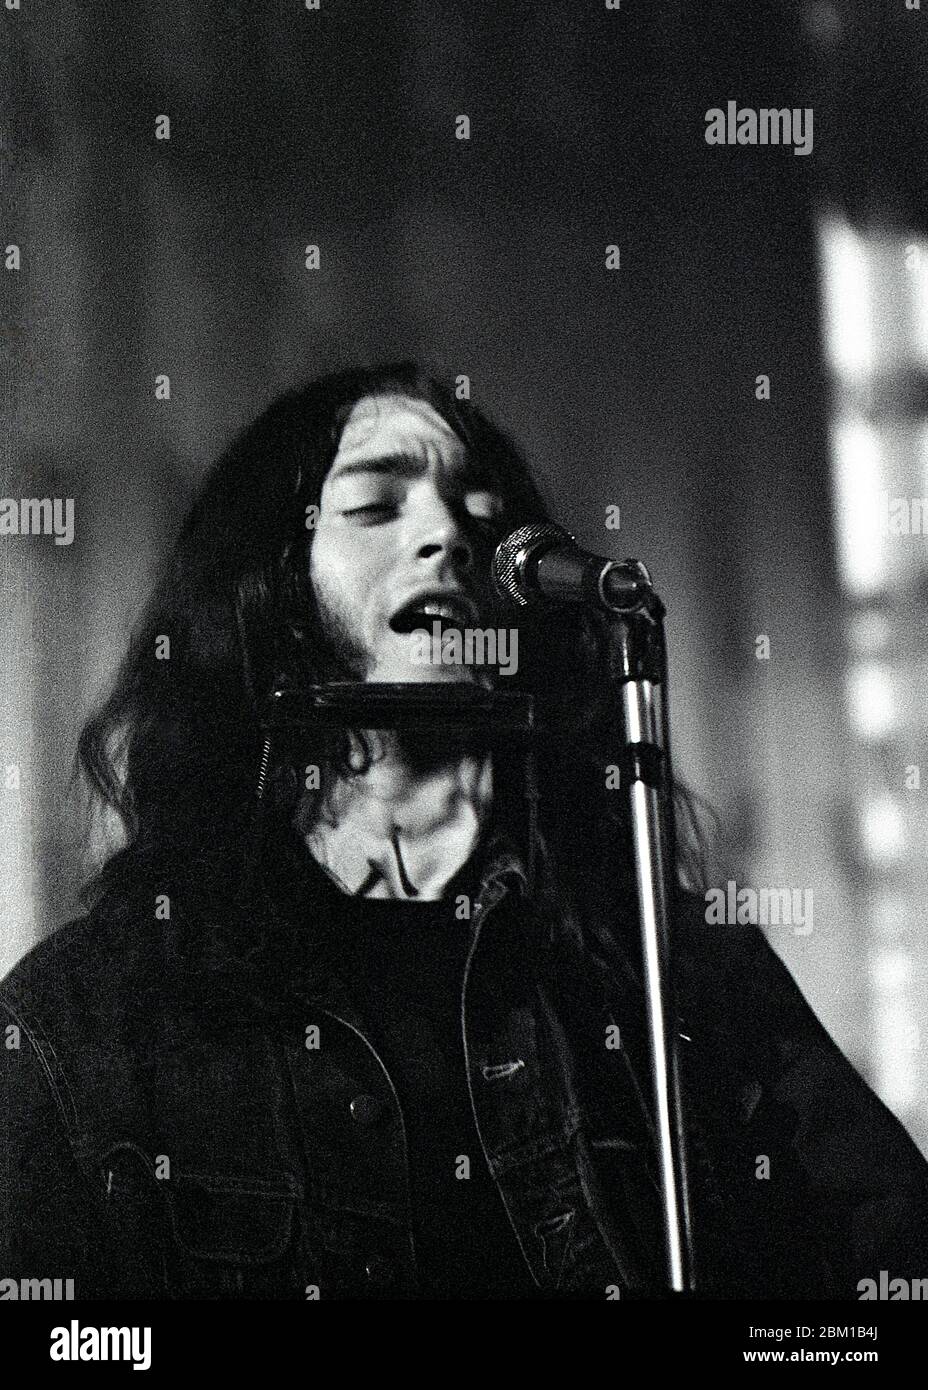 Multi-instrumentalist and songwriter Rory Gallagher performs with Taste  at the Fry-Haldane Ball, advertised as the “Terrorball”, held on 5 December 1969 in the Anson Rooms at Bristol University’s Students’ Union.  Entertainment was provided between 8pm and 2am with tickets advertised at three guineas.  The ball was organised by two societies set up for students living in lodgings, flats, residential houses or at home with the Fry Society for women and the Haldane Society for men. Stock Photo